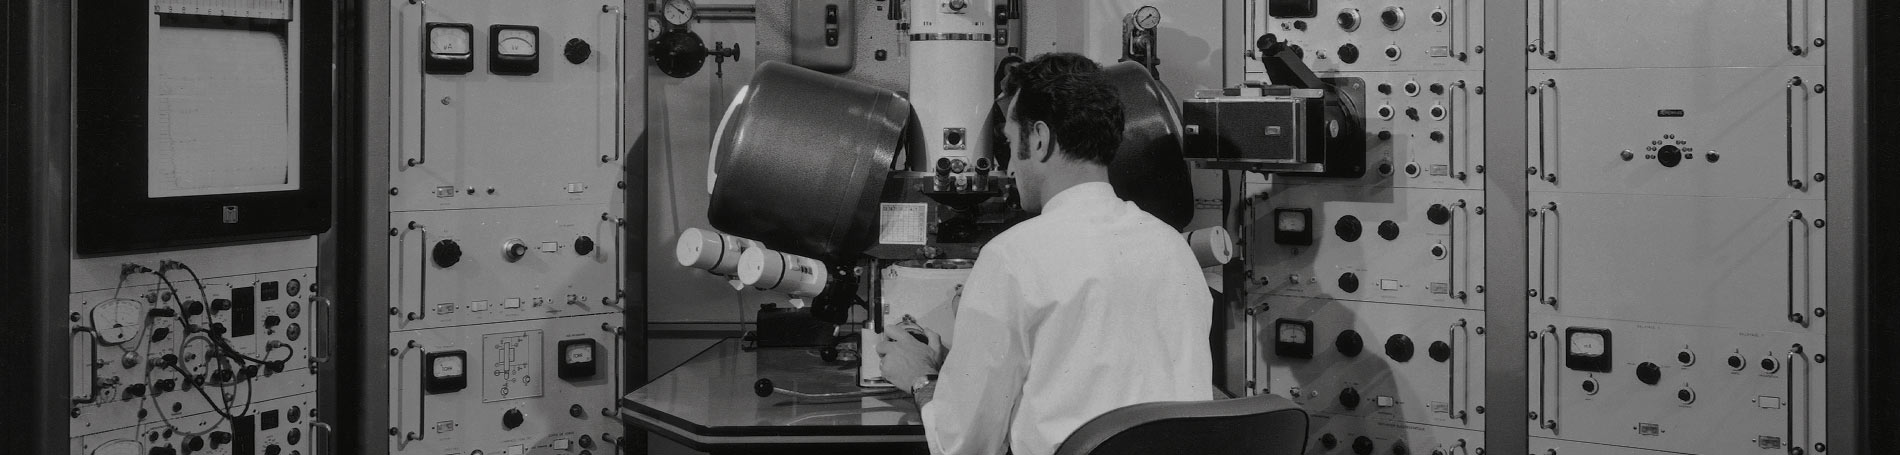 Geochemical analysis in BRGM laboratories in the 1960s. © BRGM